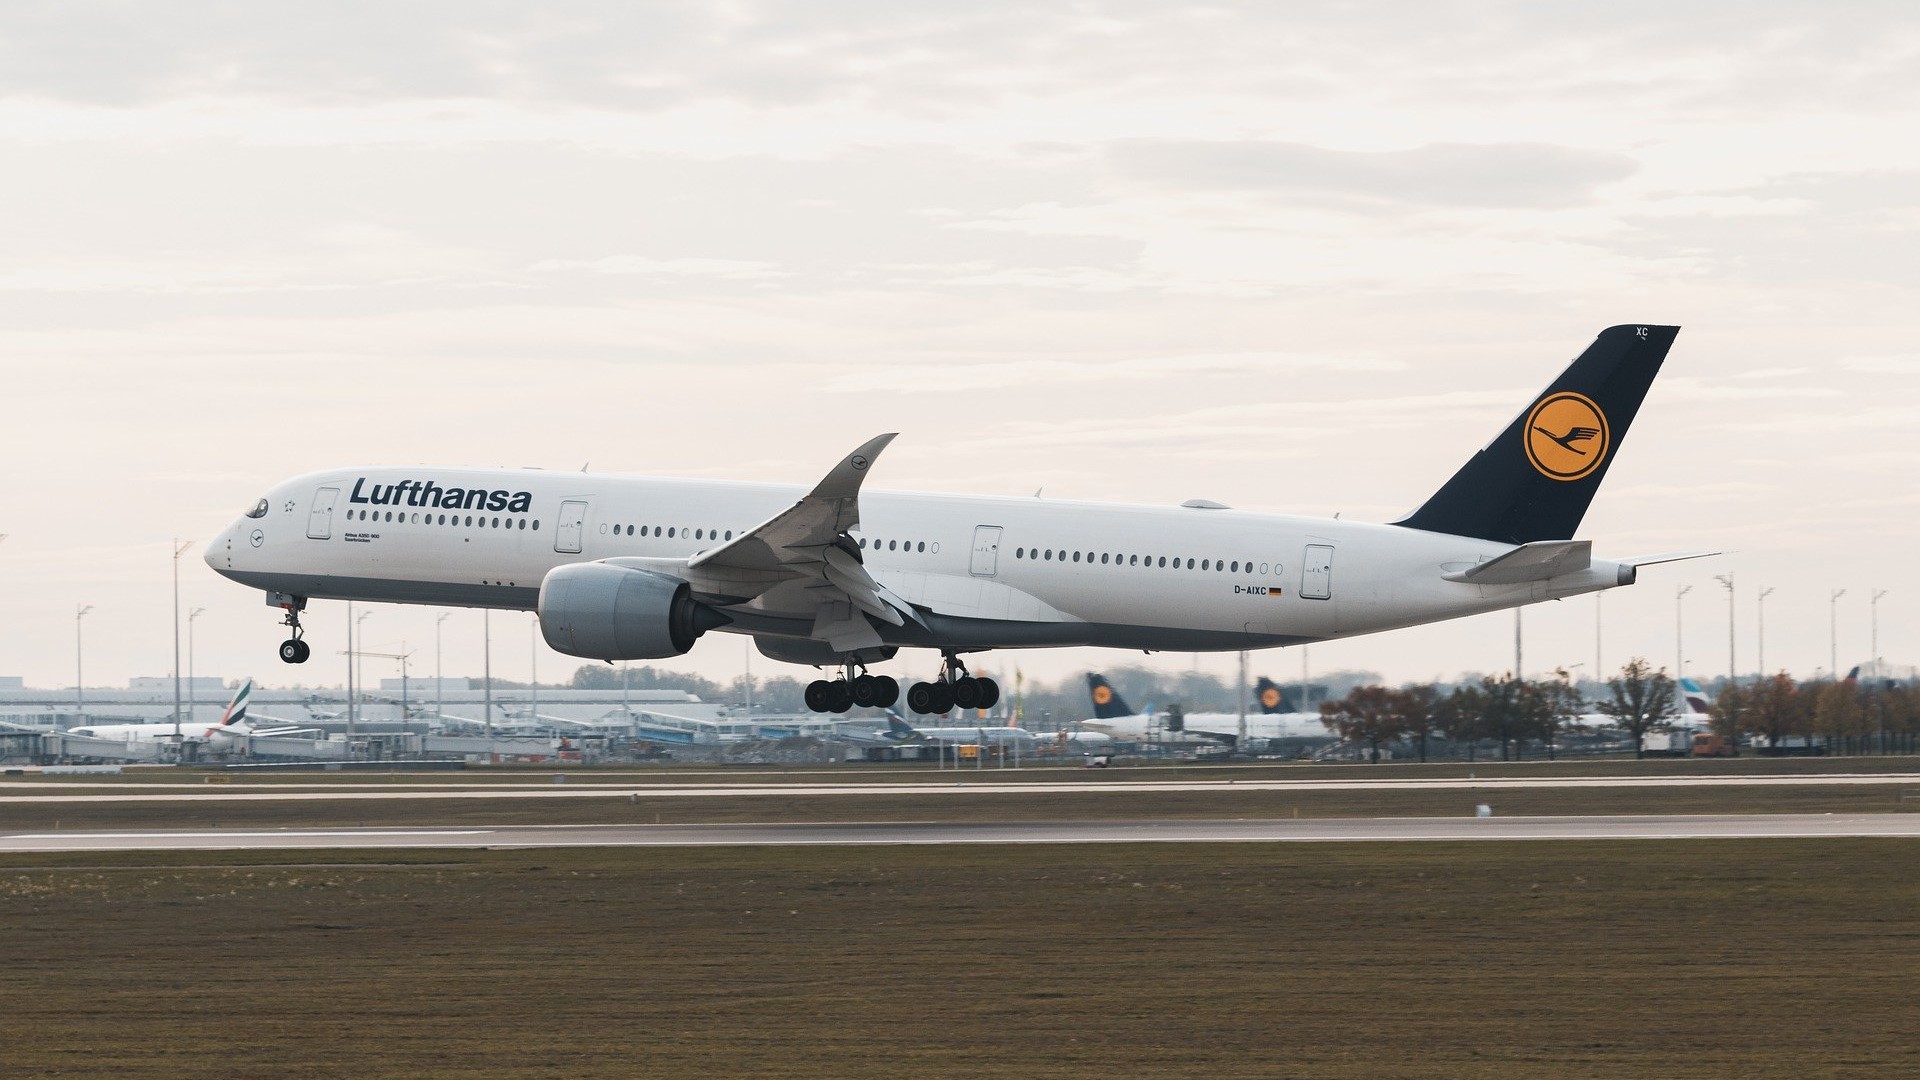 Lufthansa has partially reached pre-crisis levels with US flights